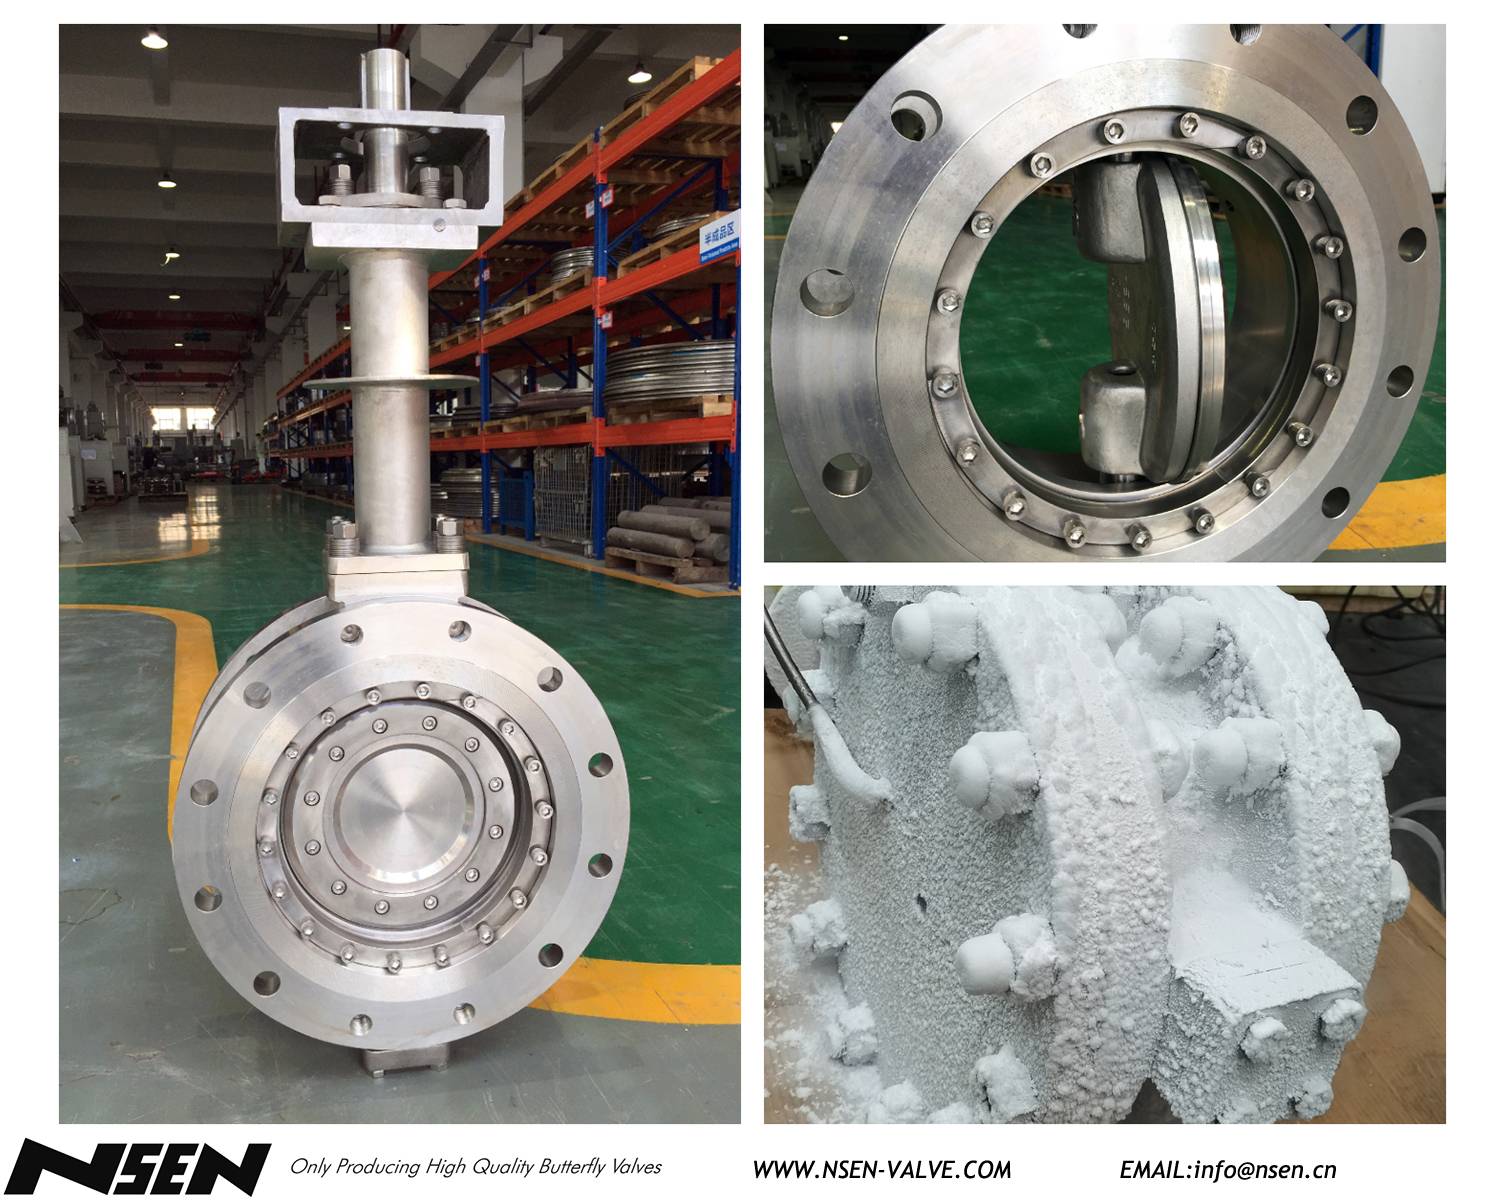 -196℃ Cryogenic Butterfly Valve pass TUV witness test